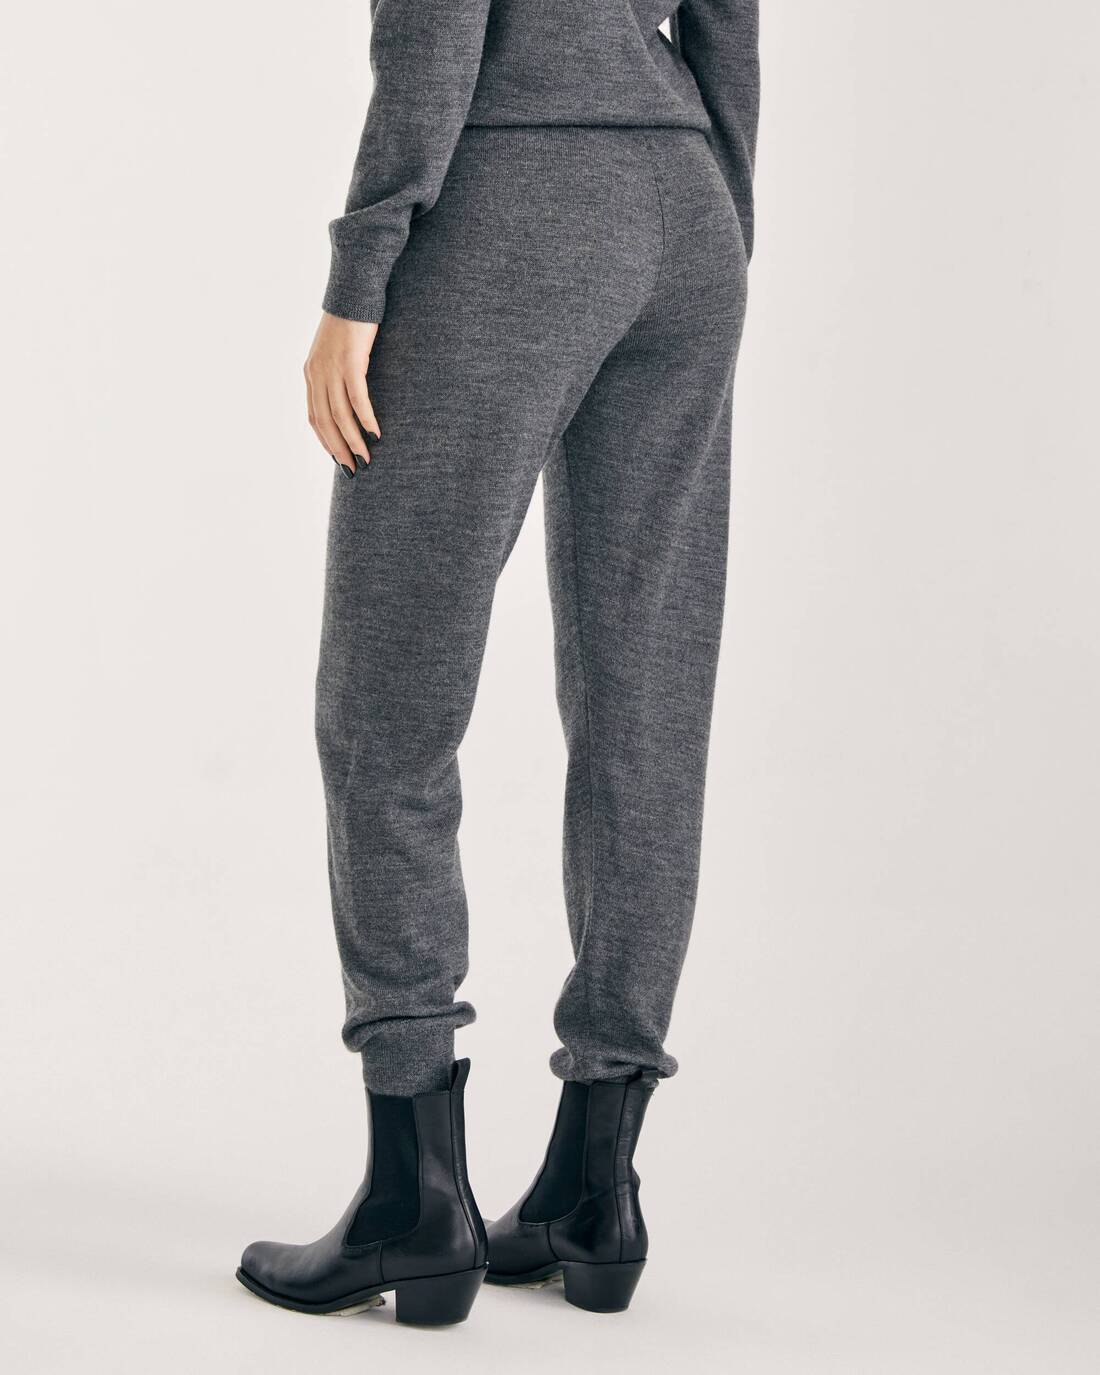 Semi-fitted joggers